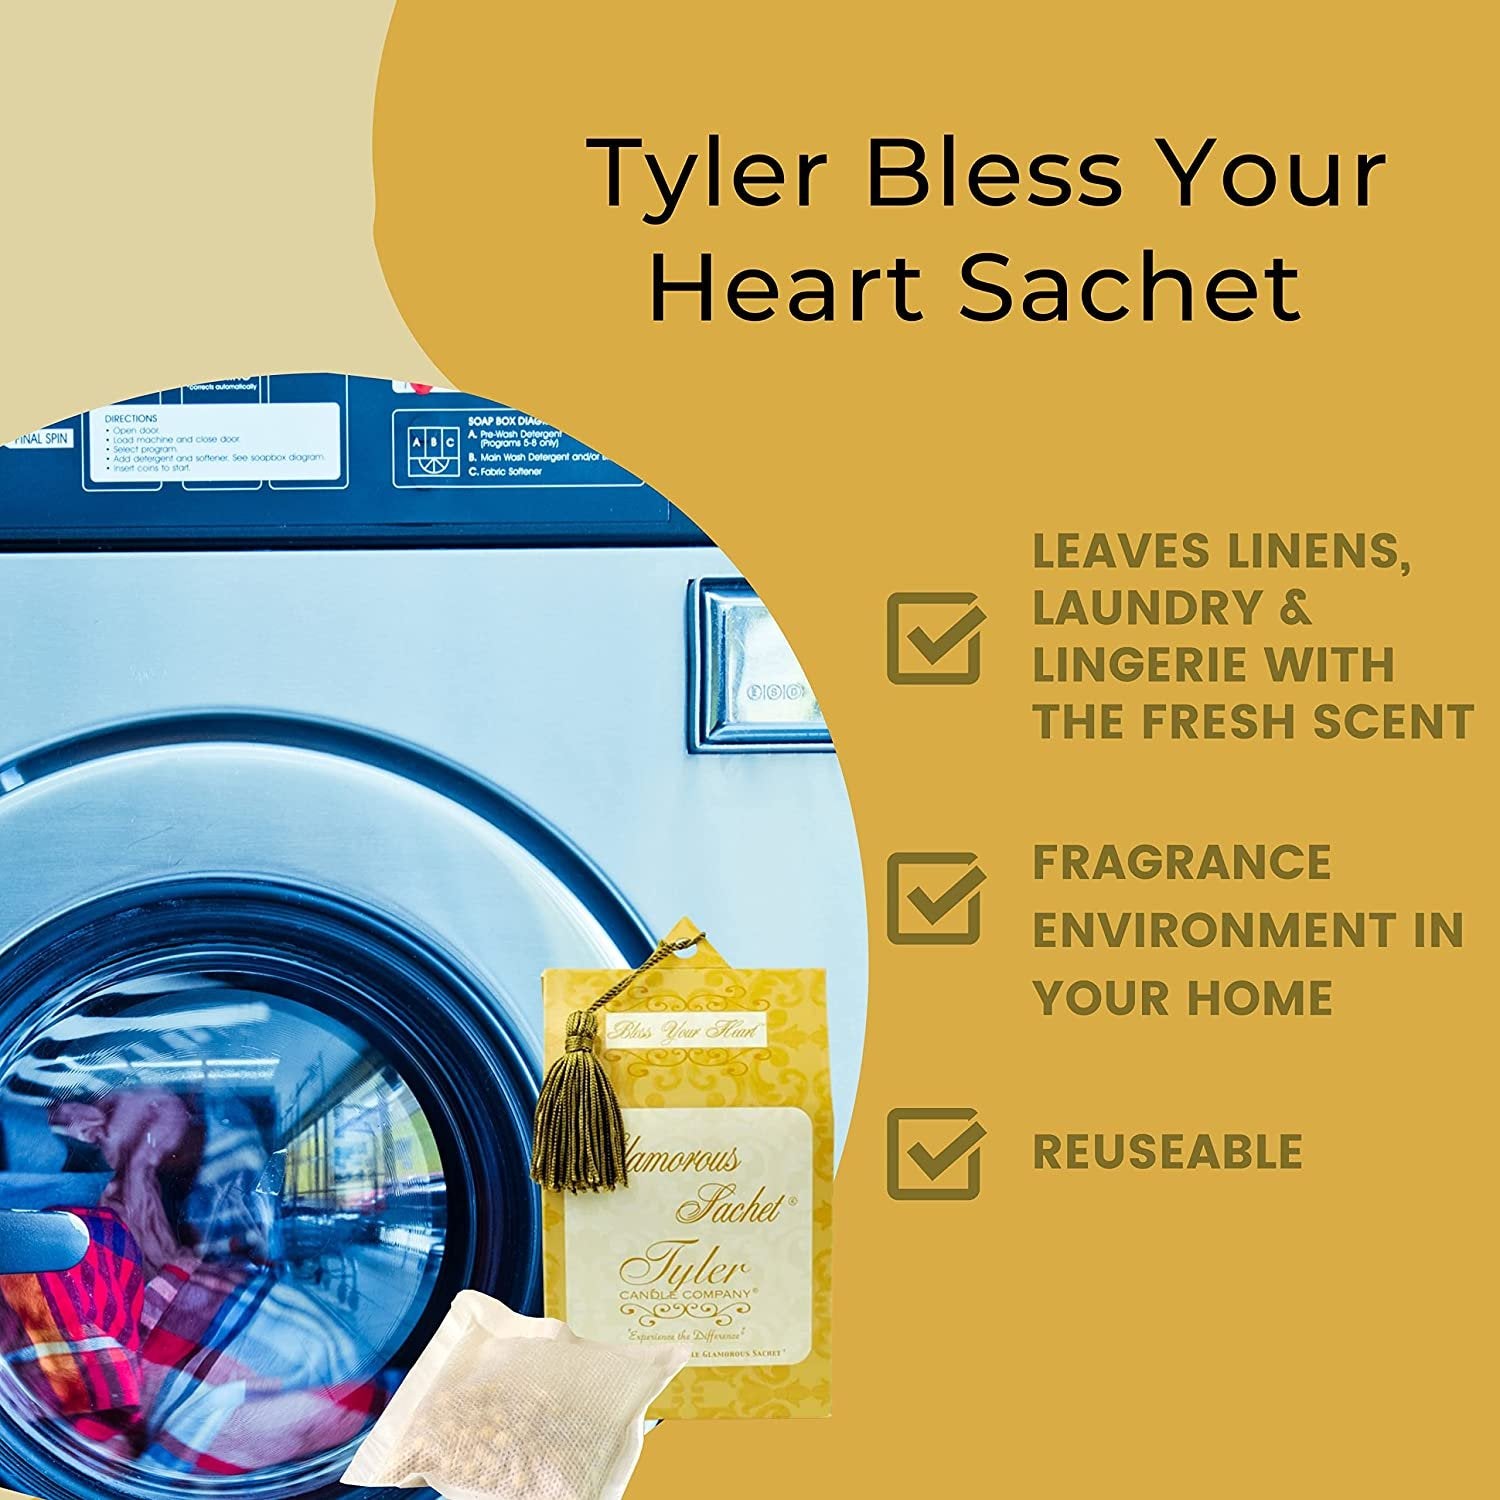 Tyler Candle Company Bless Your Heart Dryer Sheet Sachets - Glamorous Reusable Dryer Sheets - Sachets for Drawers and Closets - 2 Pack of 4 Sachets, Dryer, Home, or Personal Sachet, w Bonus Key Chain